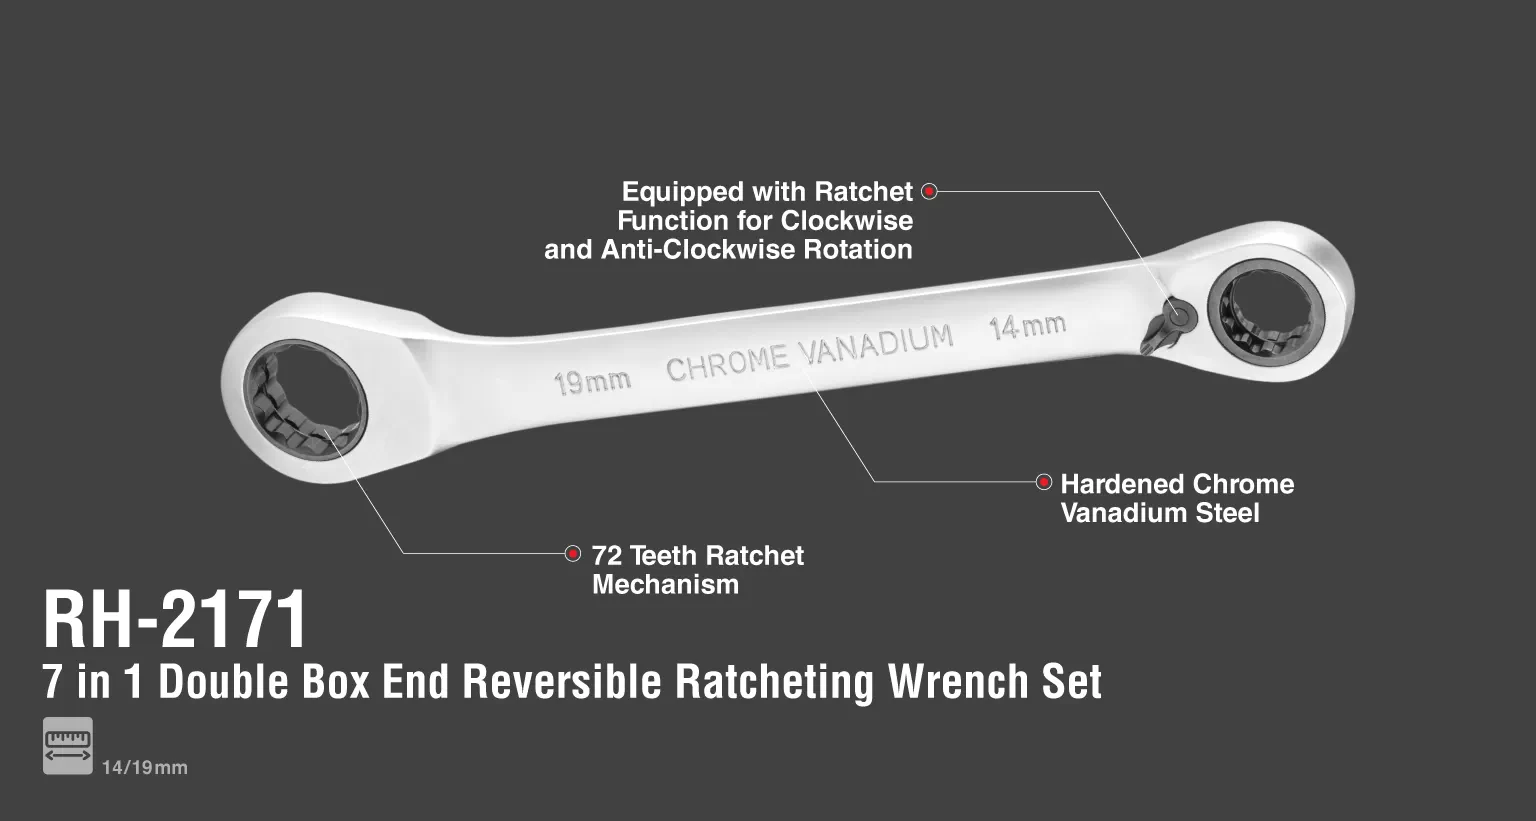 7 in 1 double box end reversible ratcheting wrench set_details